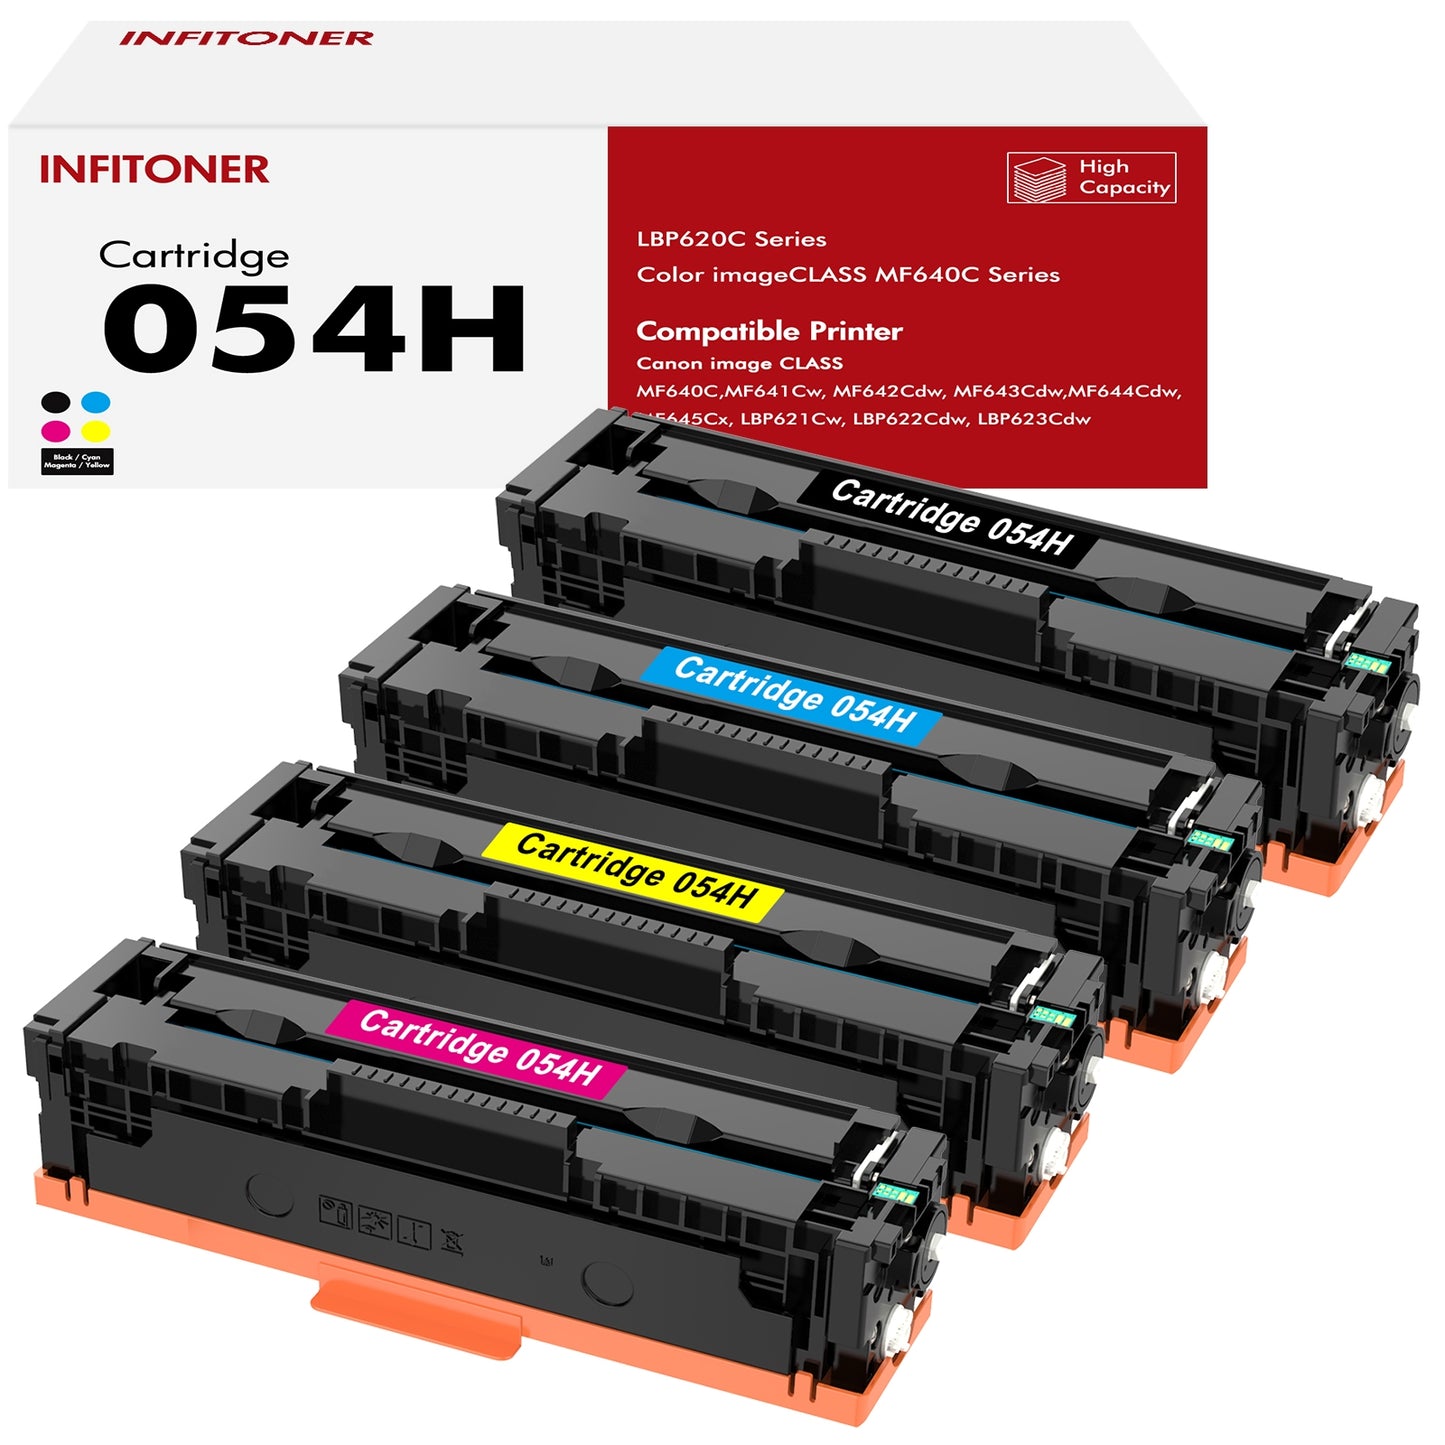 INFITONER Compatible 054 Toner Cartridge Replacement for Canon 054H 054 CRG 054H Color ImageCLASS MF642Cdw MF644Cdw MF641Cw LBP622Cdw MF644 Printer Ink (Black Cyan Magenta Yellow, 4-Pack)